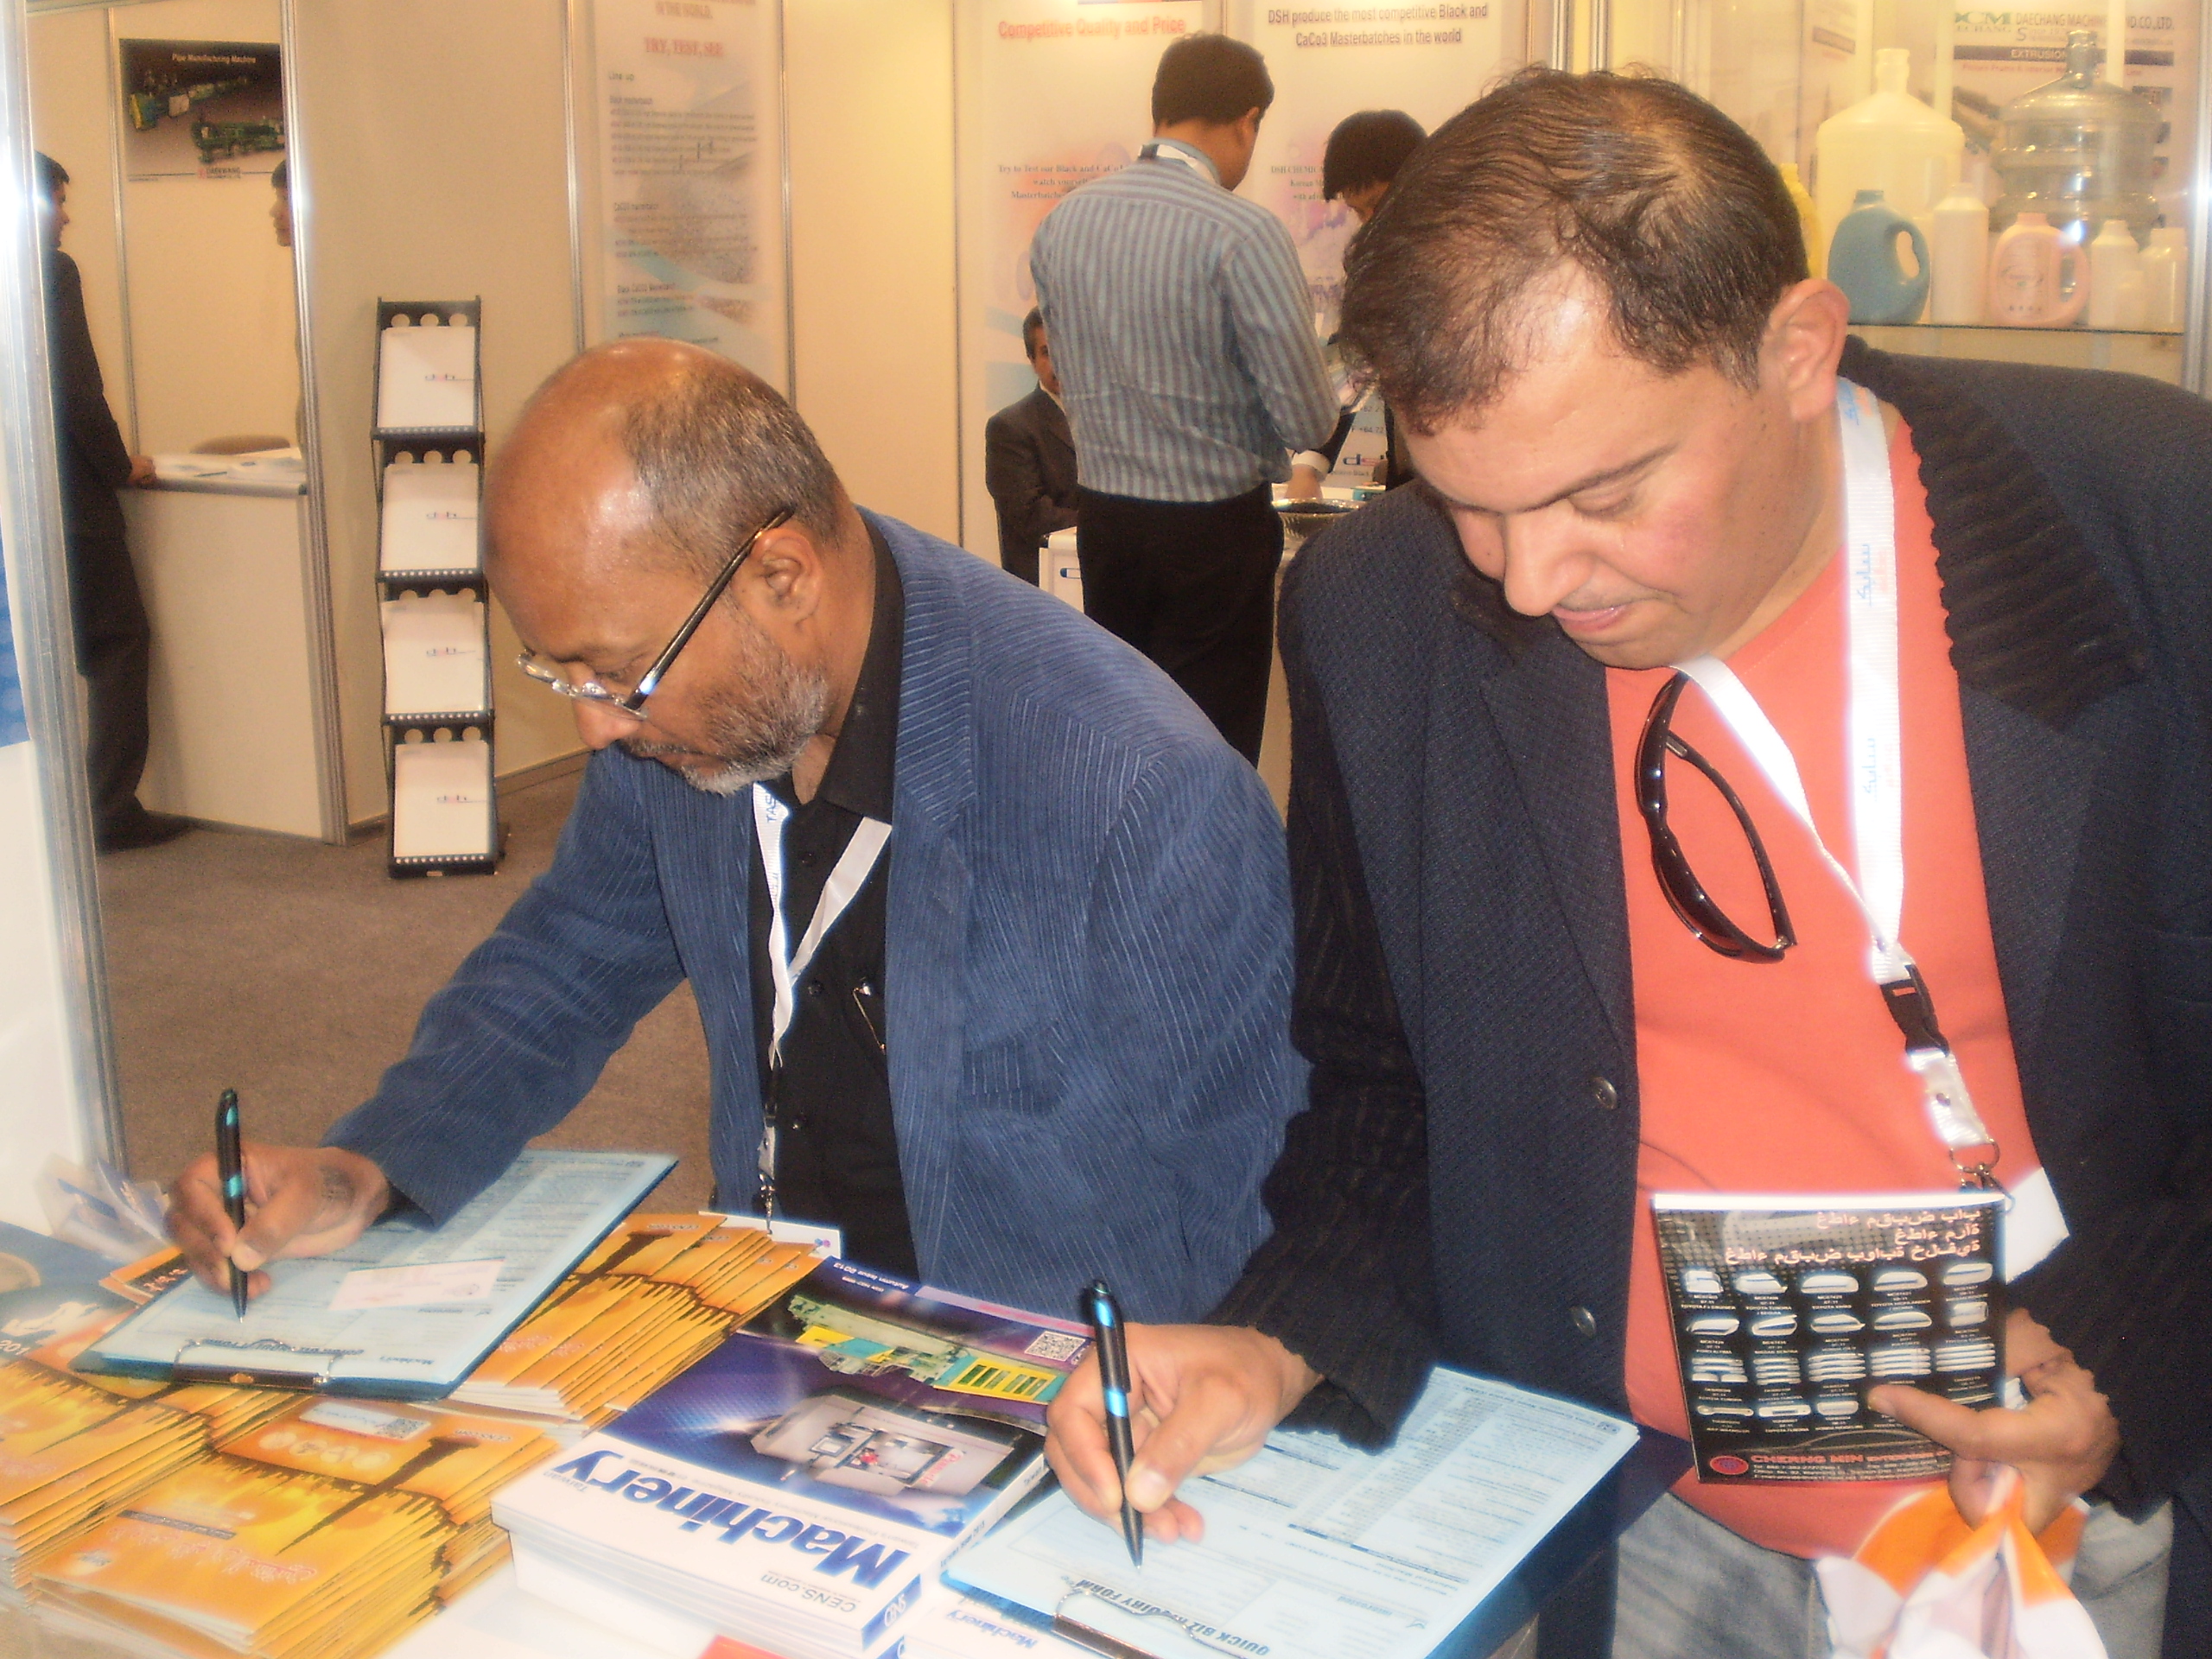 Buyers filling out inquiry forms at the CENS booth